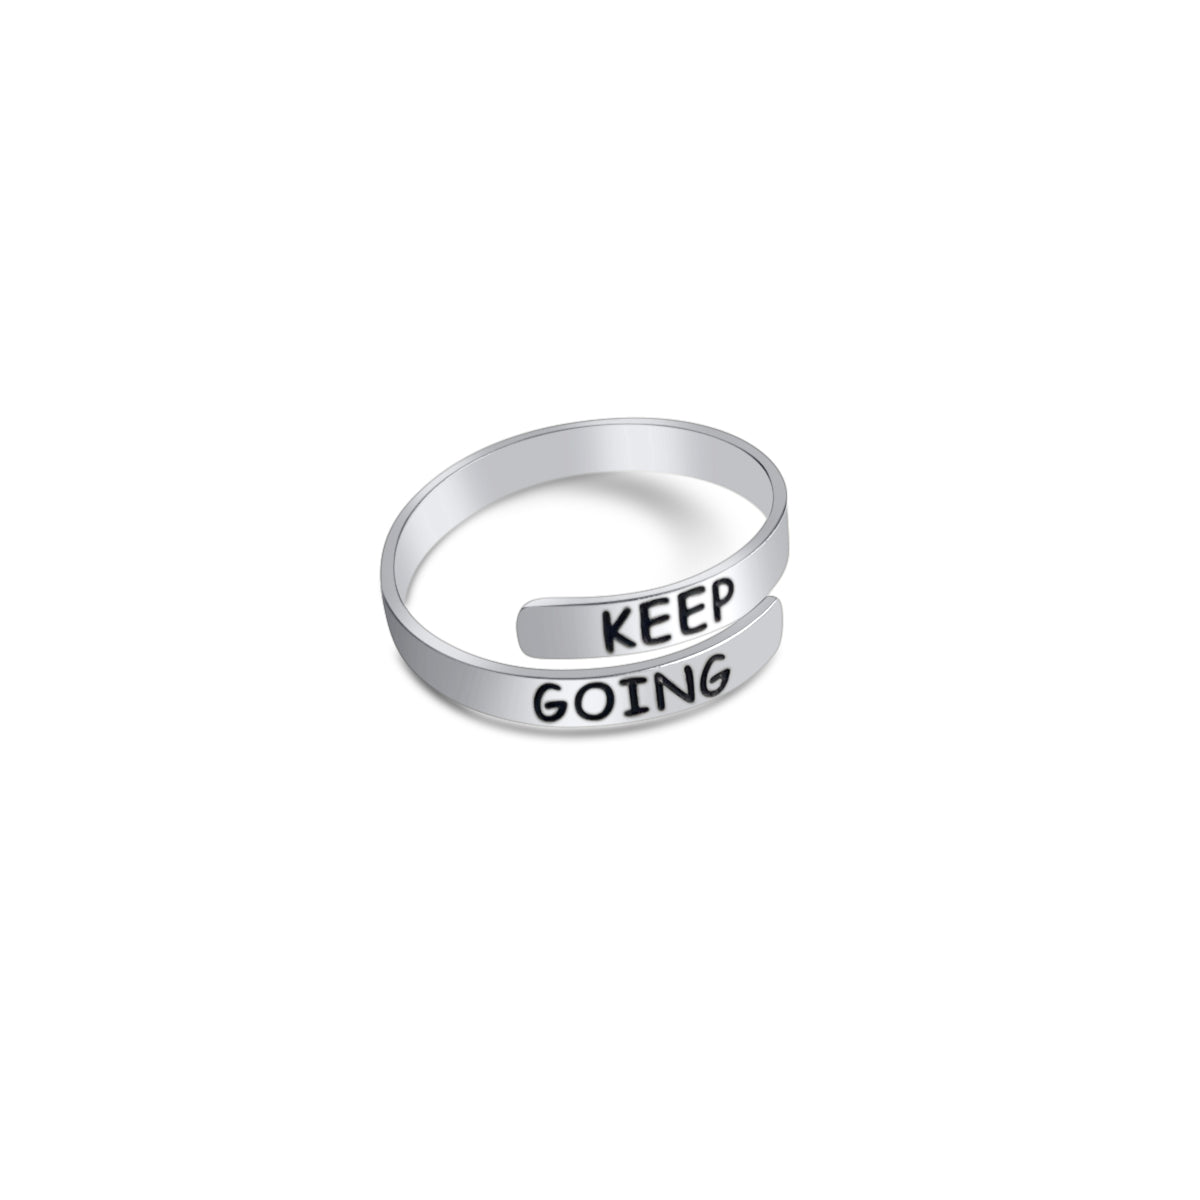 Keep Going (Affirmation Ring)